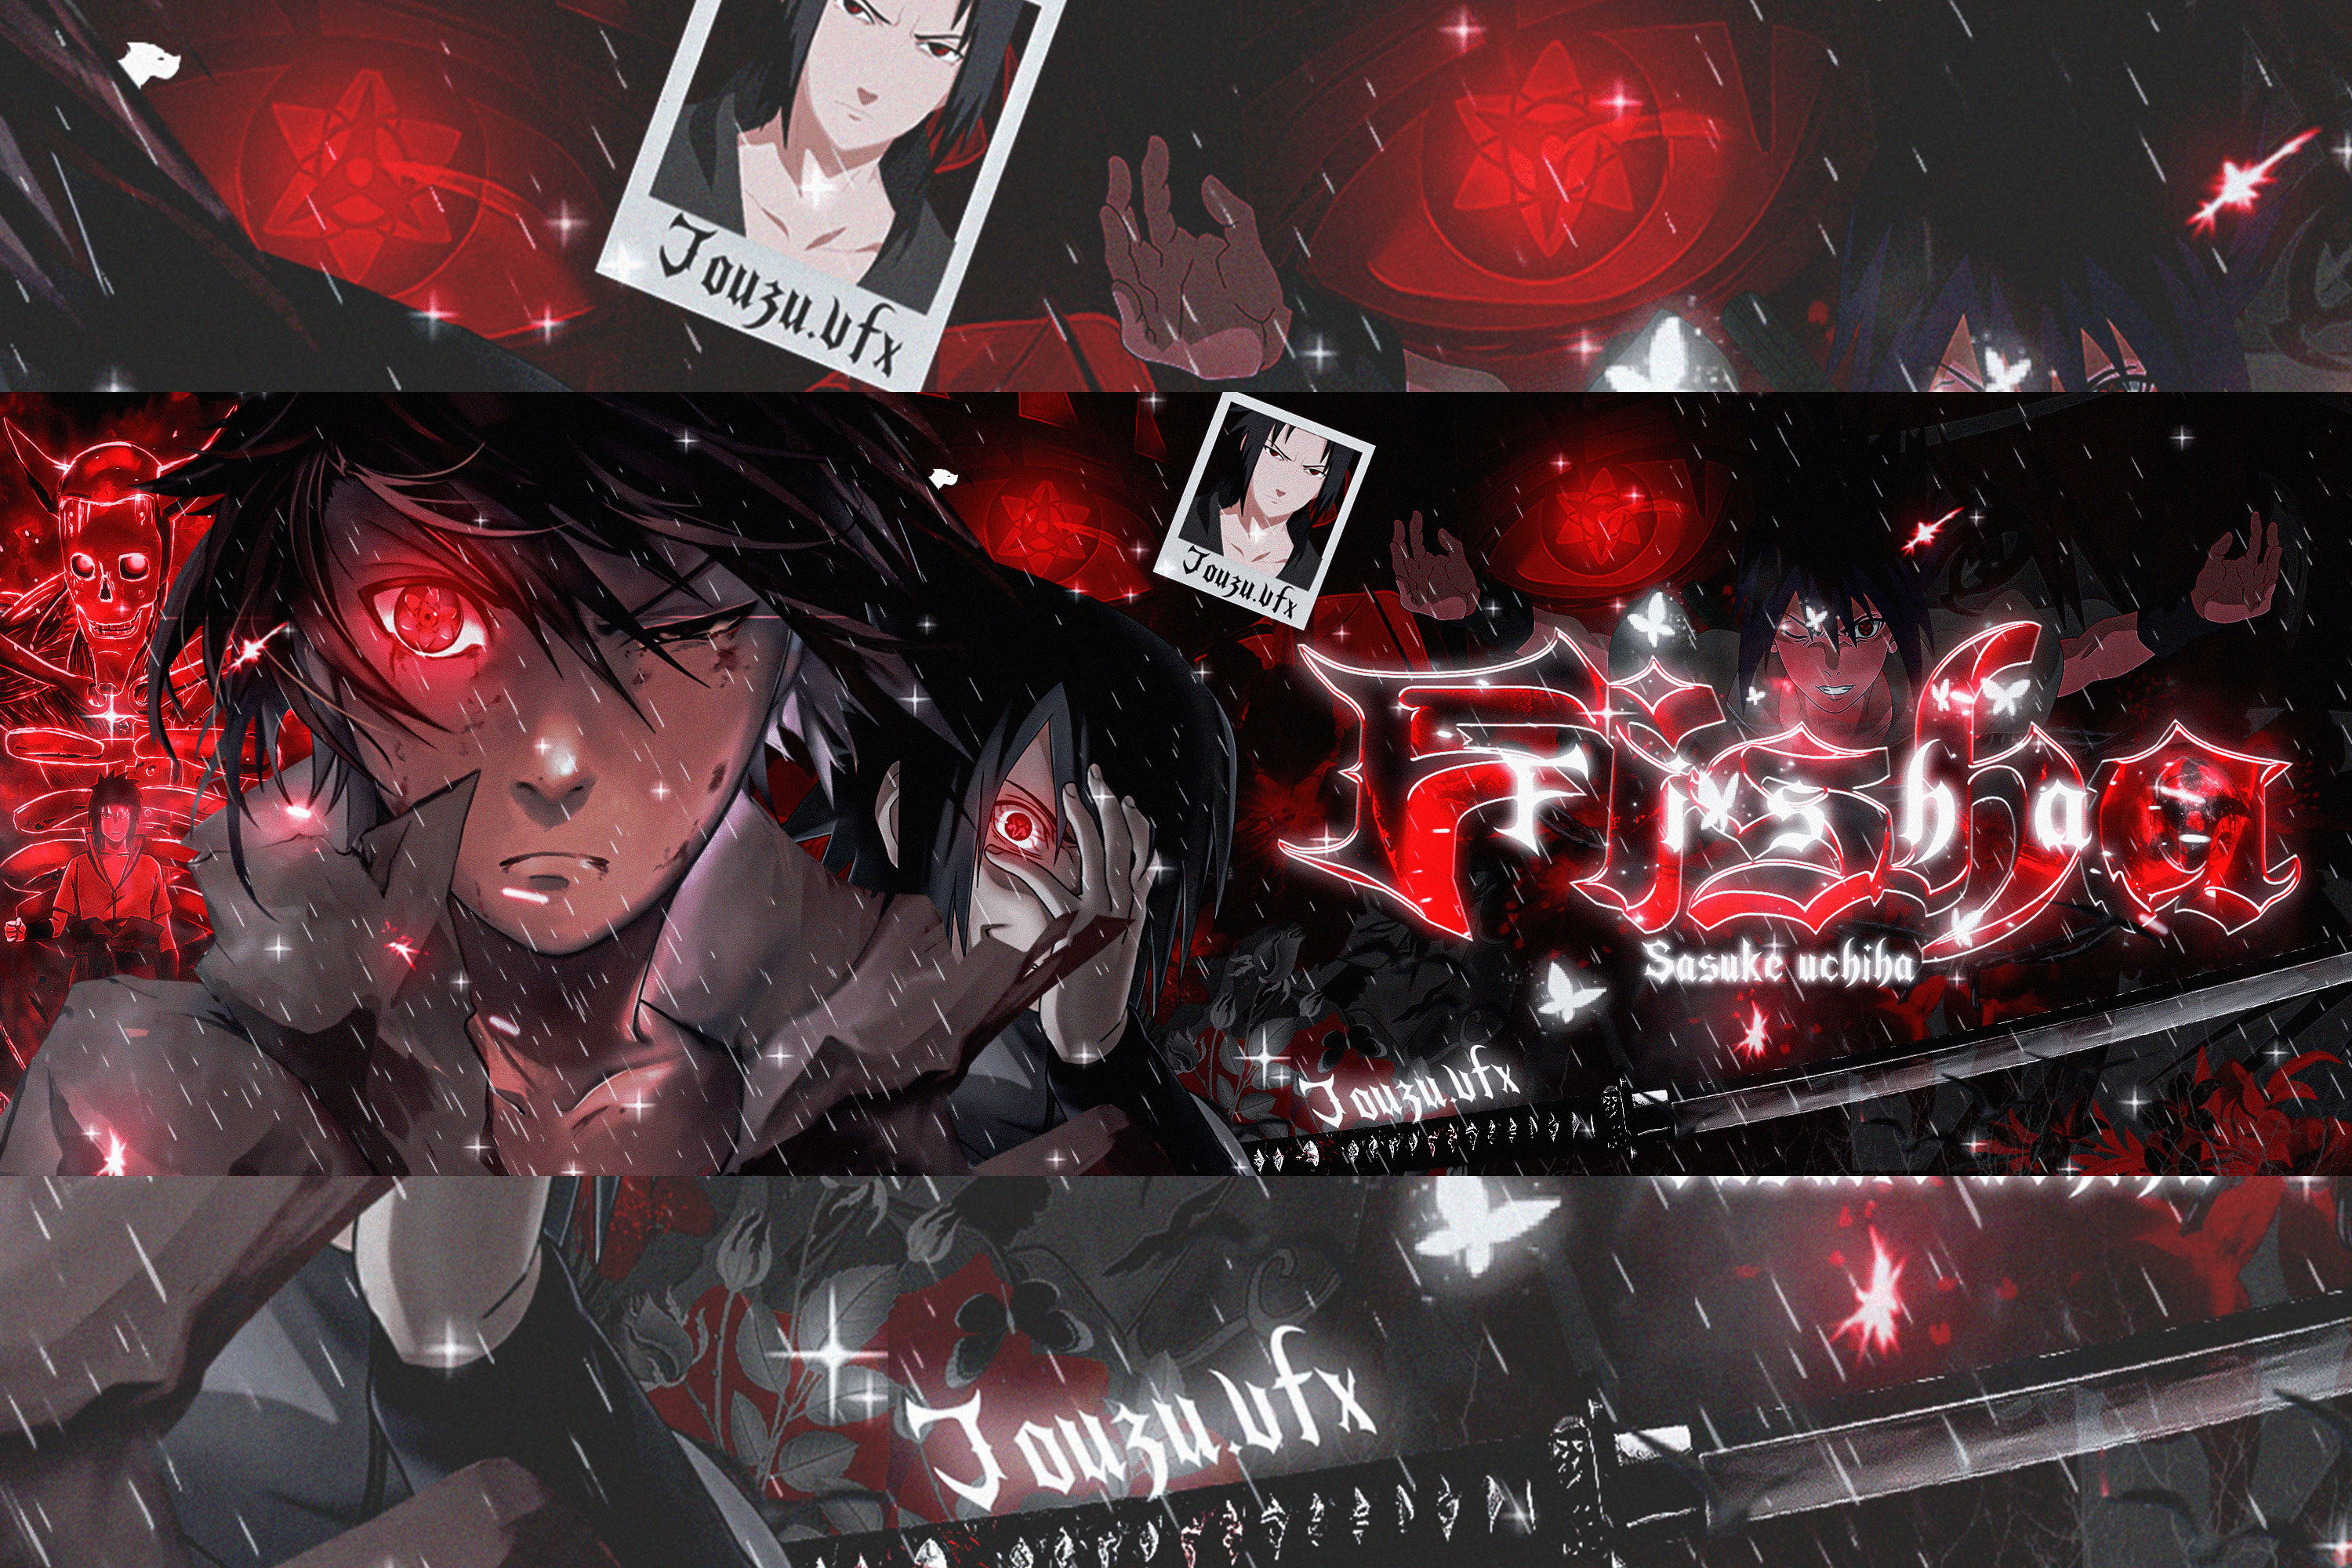 Design anime banner for twitch, twitter, youtube by Ashley_gr | Fiverr